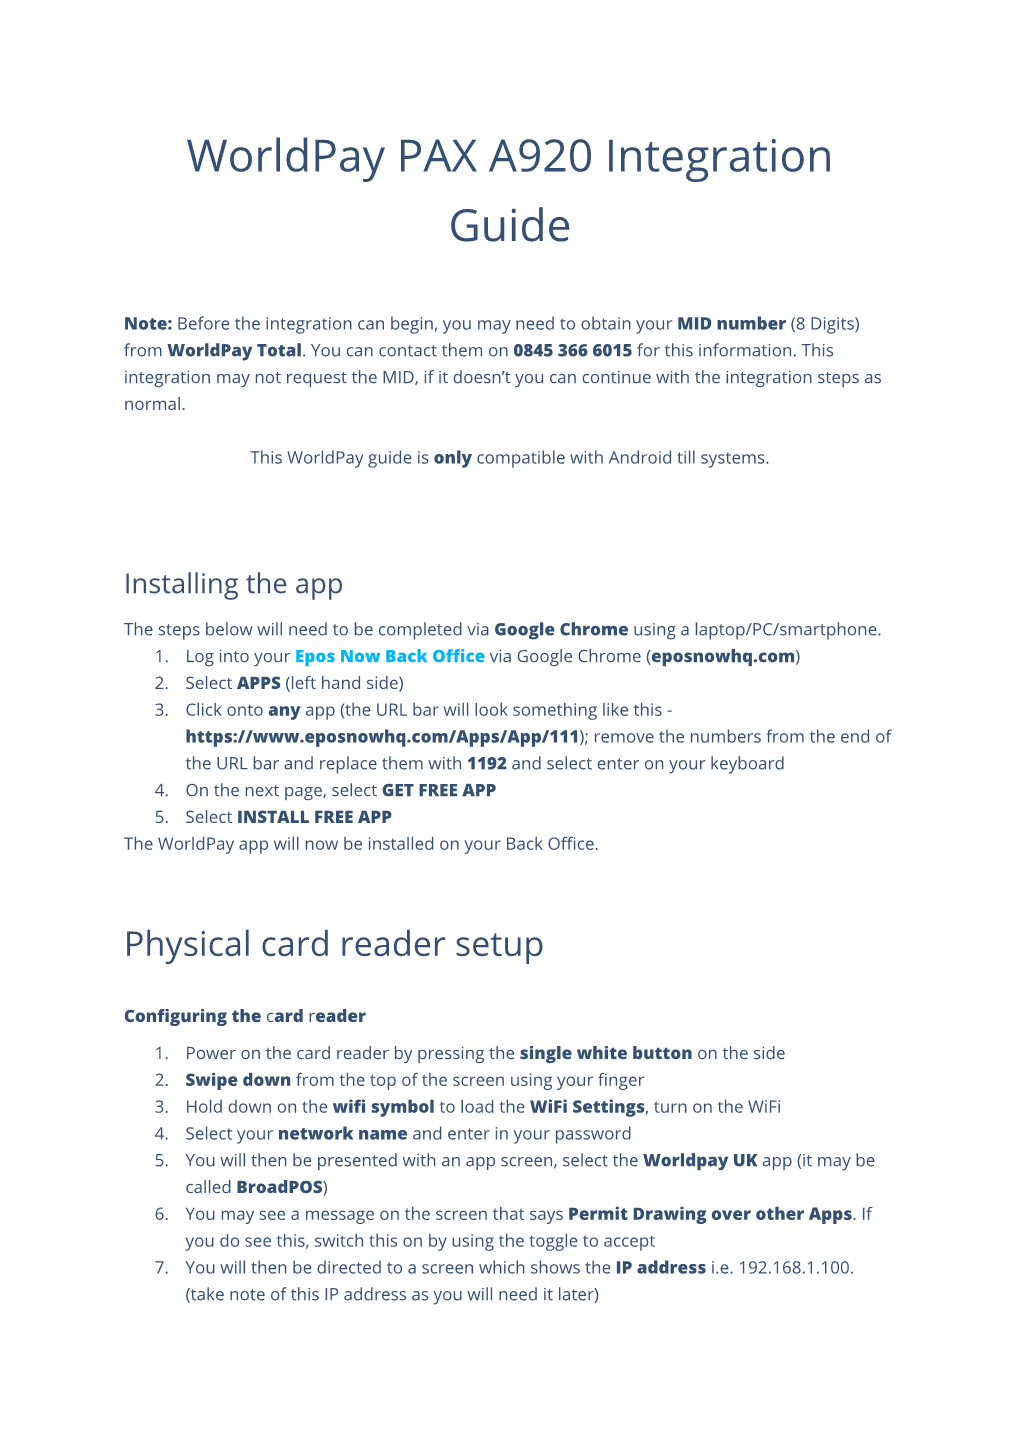 Worldpay PAX A920 Integration Guide